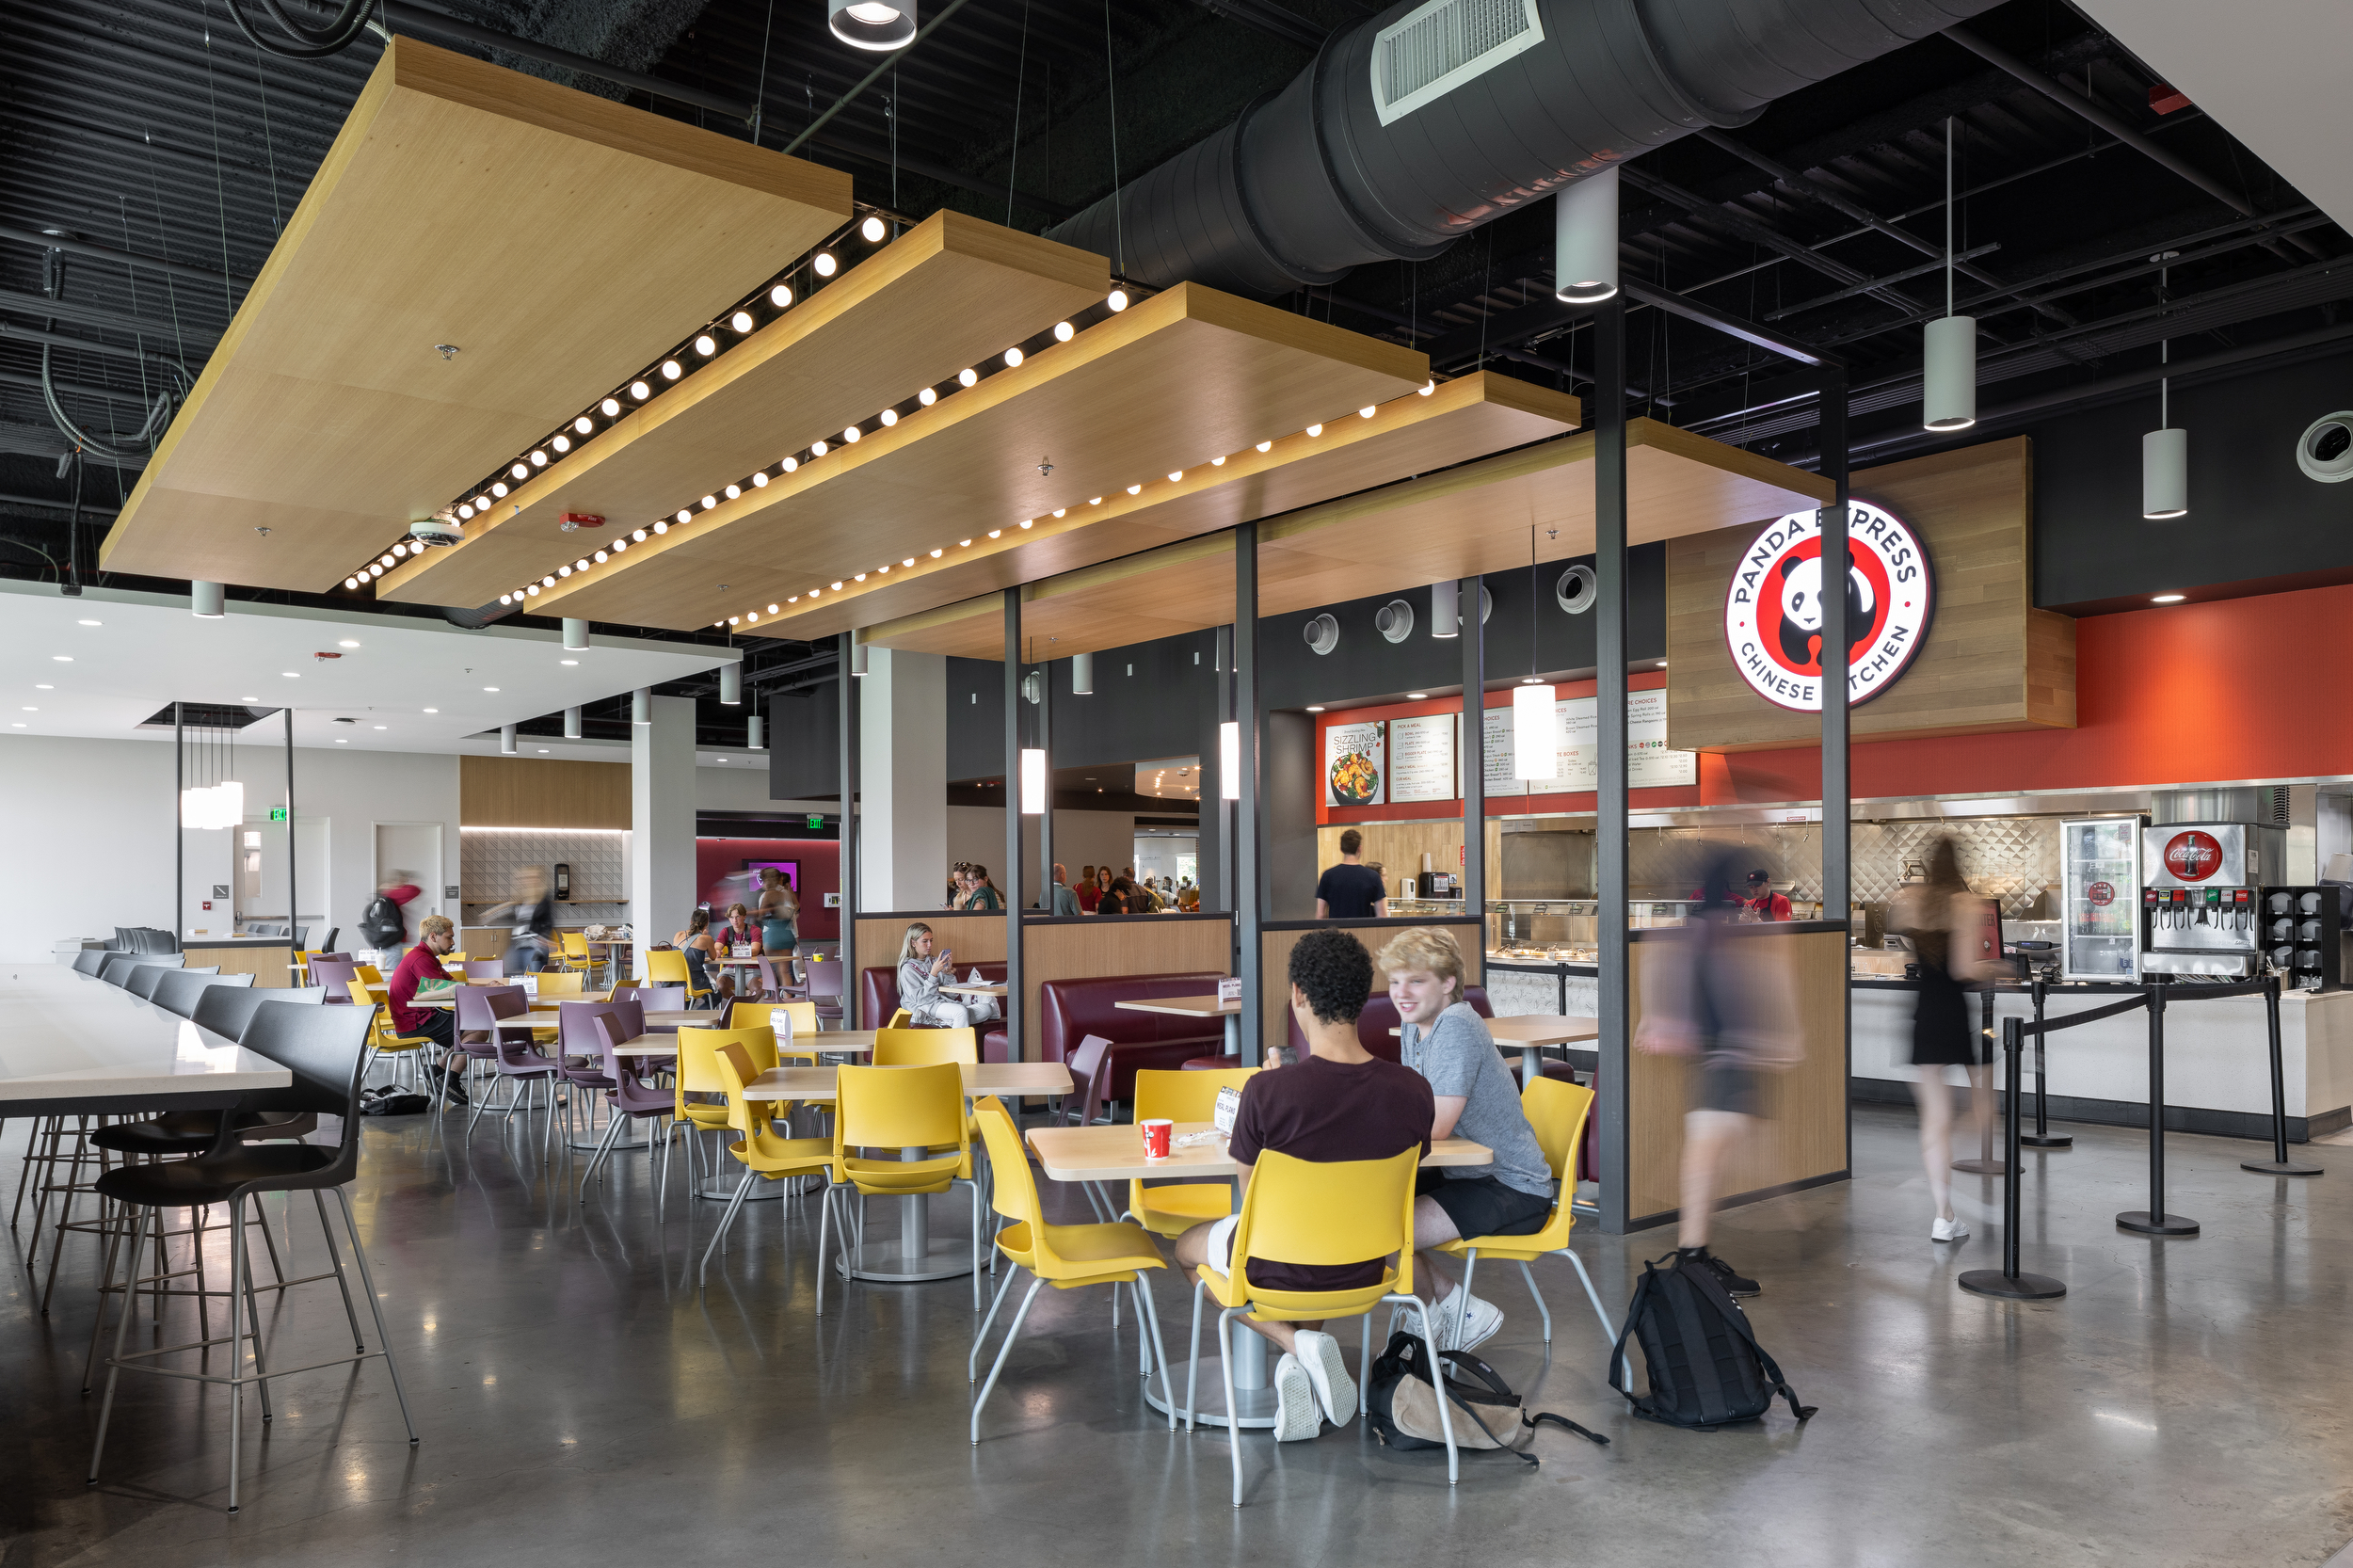 View of the inside of the Florida State University Student Union food court. The interior has an industrial, modern design with wooden accents and stylish edison bulbs. College kids are sitting at dining tables with bright yellow chairs eating their meals. In the background is a Panda Express restaurant.